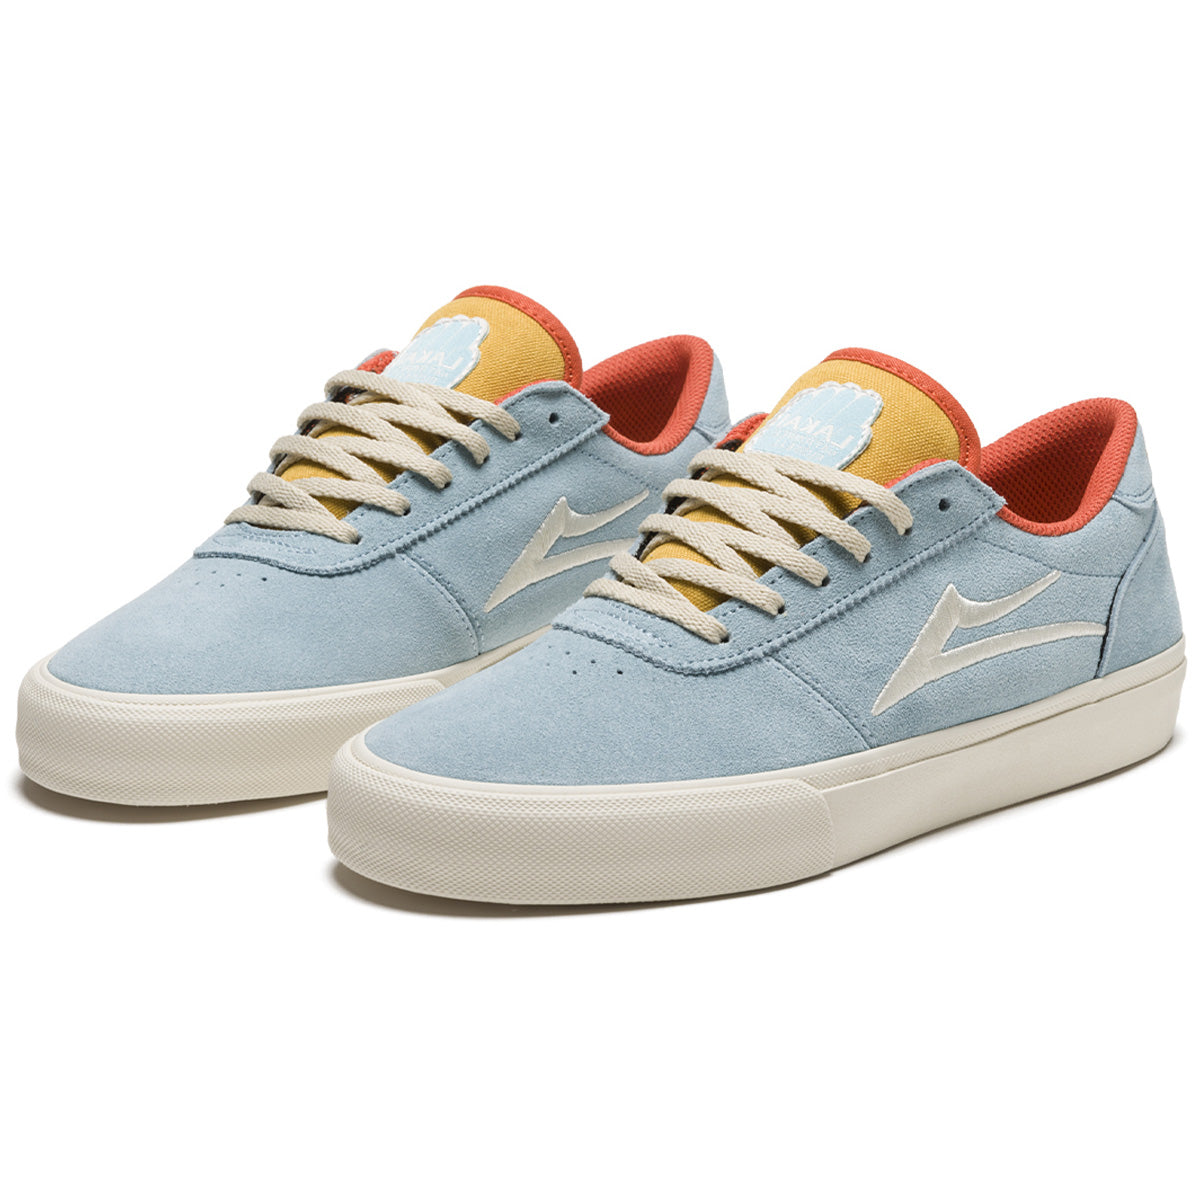 Lakai x Nathaniel Russell Manchester Shoes - Blue